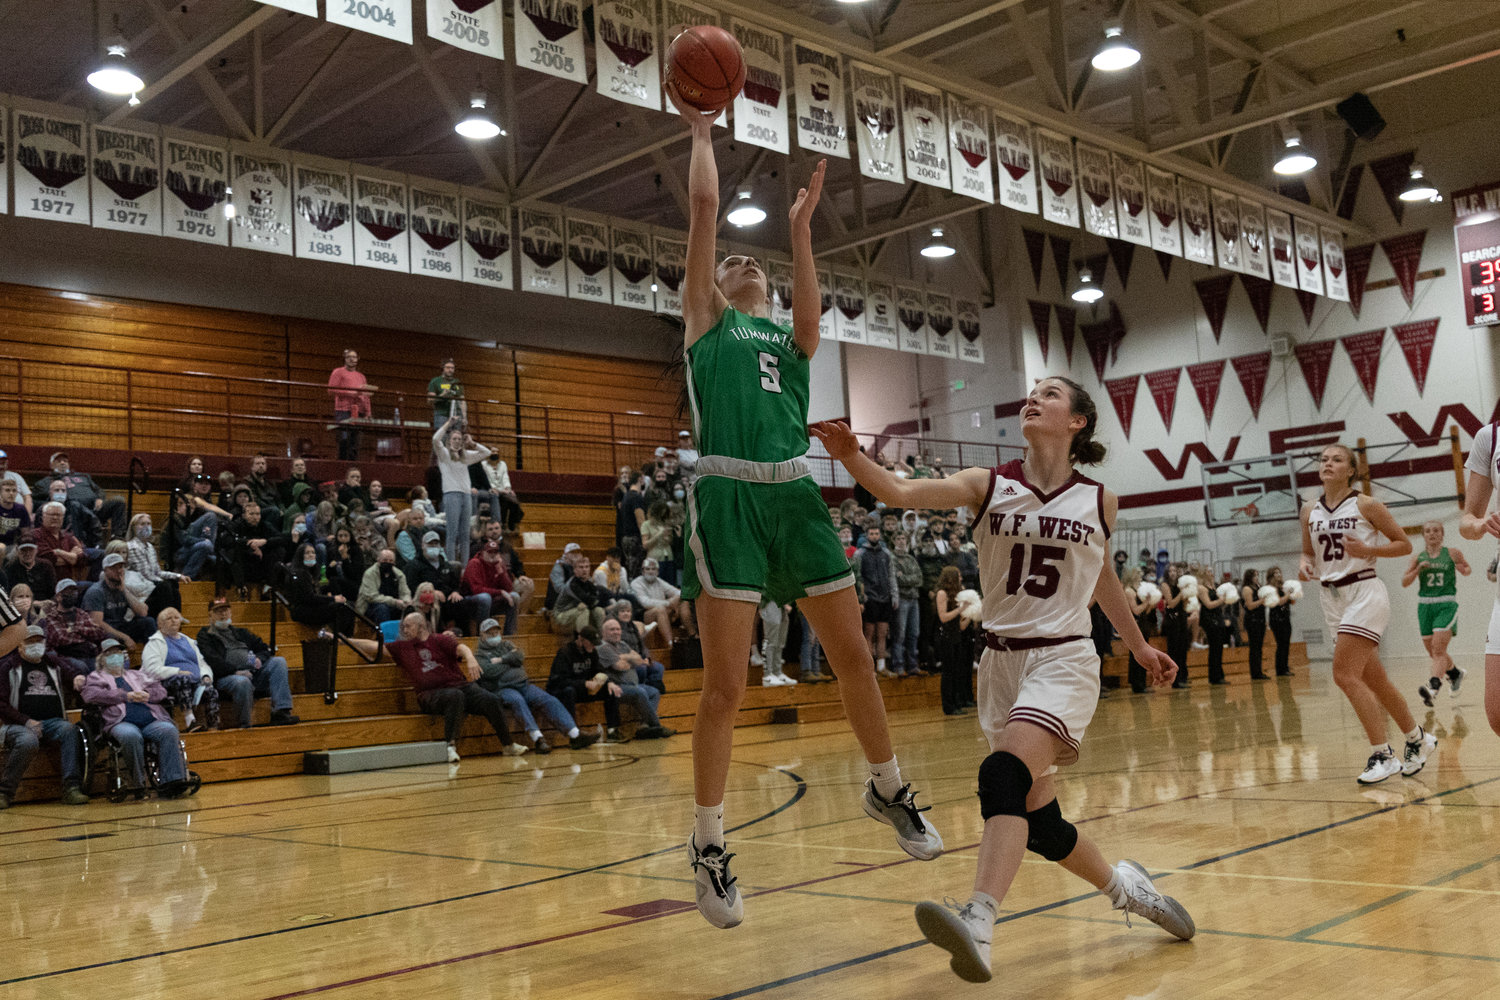 Tumwater's Natalie Sumrok rises for a layup against W.F. West Dec. 17.